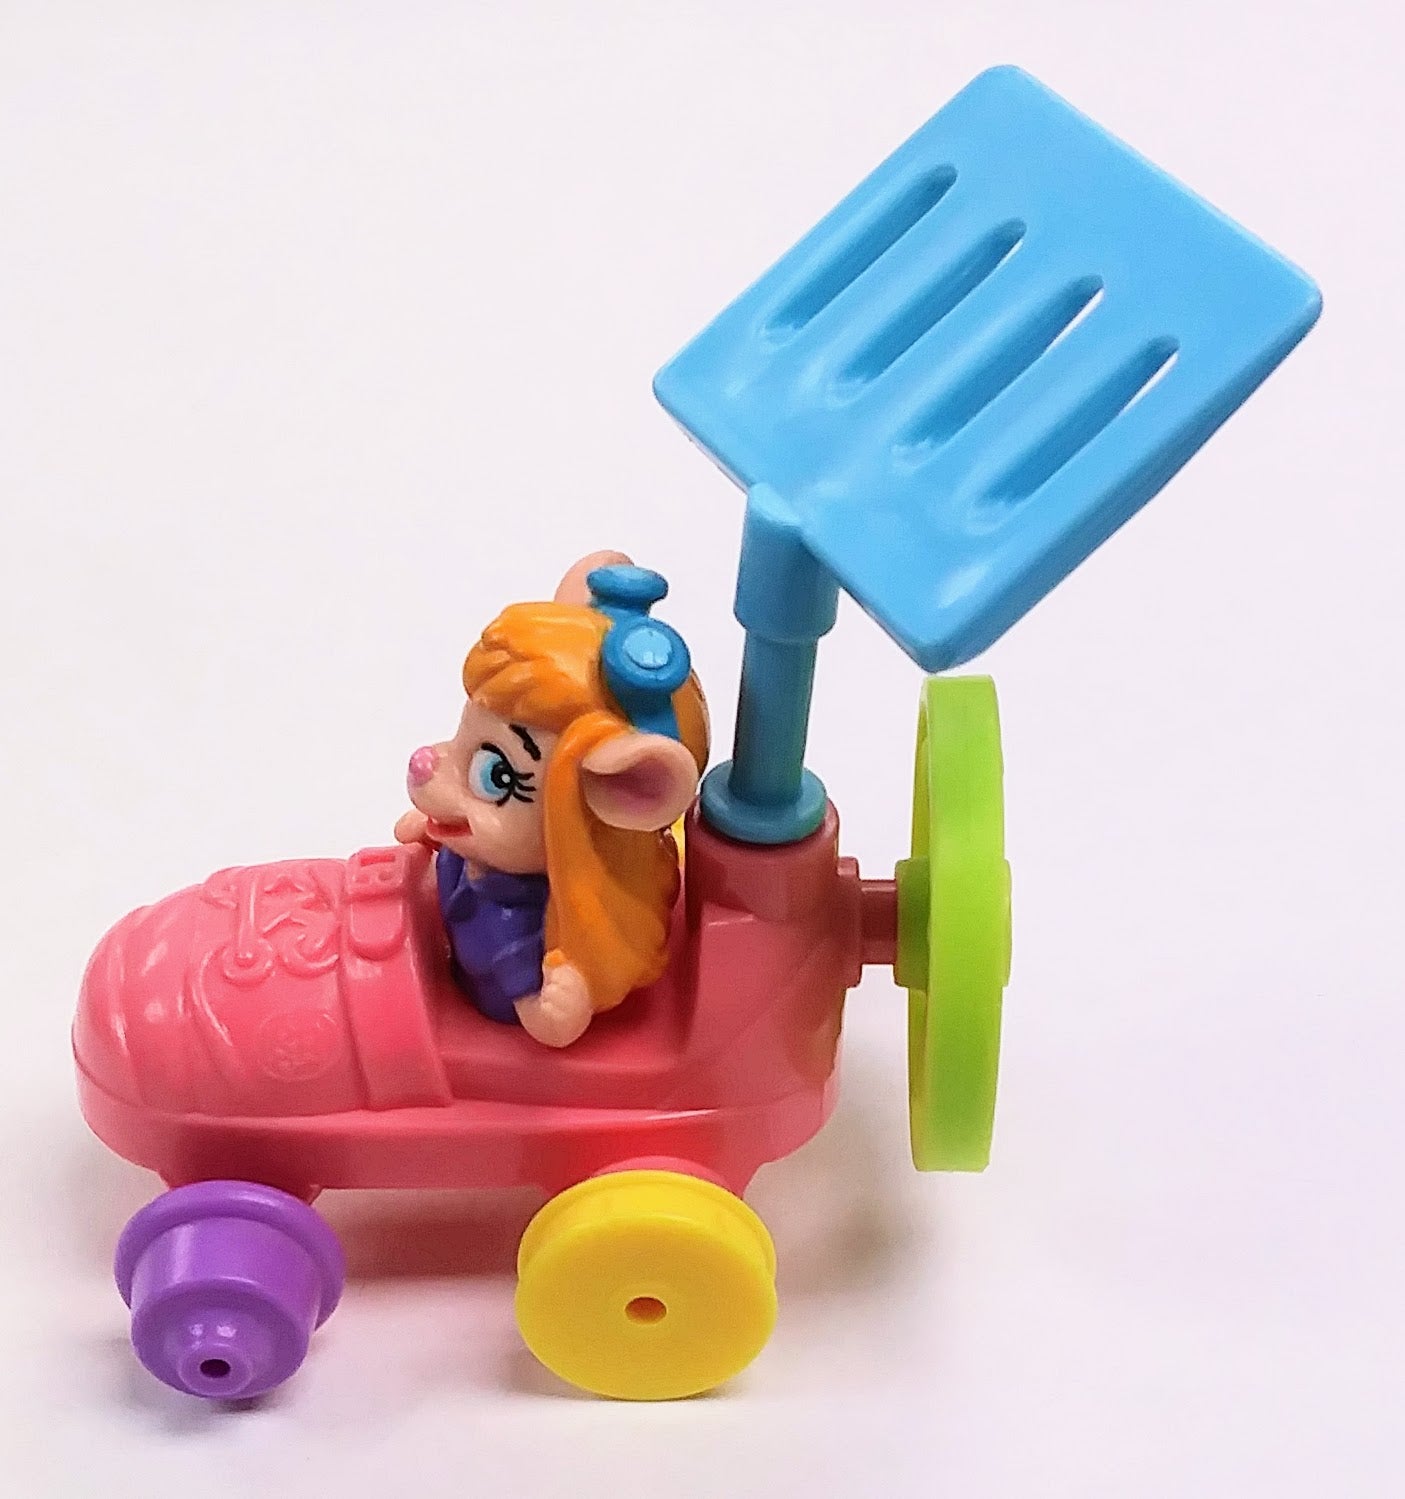 Disney Happy Meal toy - Gadget from Chip N' Dale Rescue Rangers